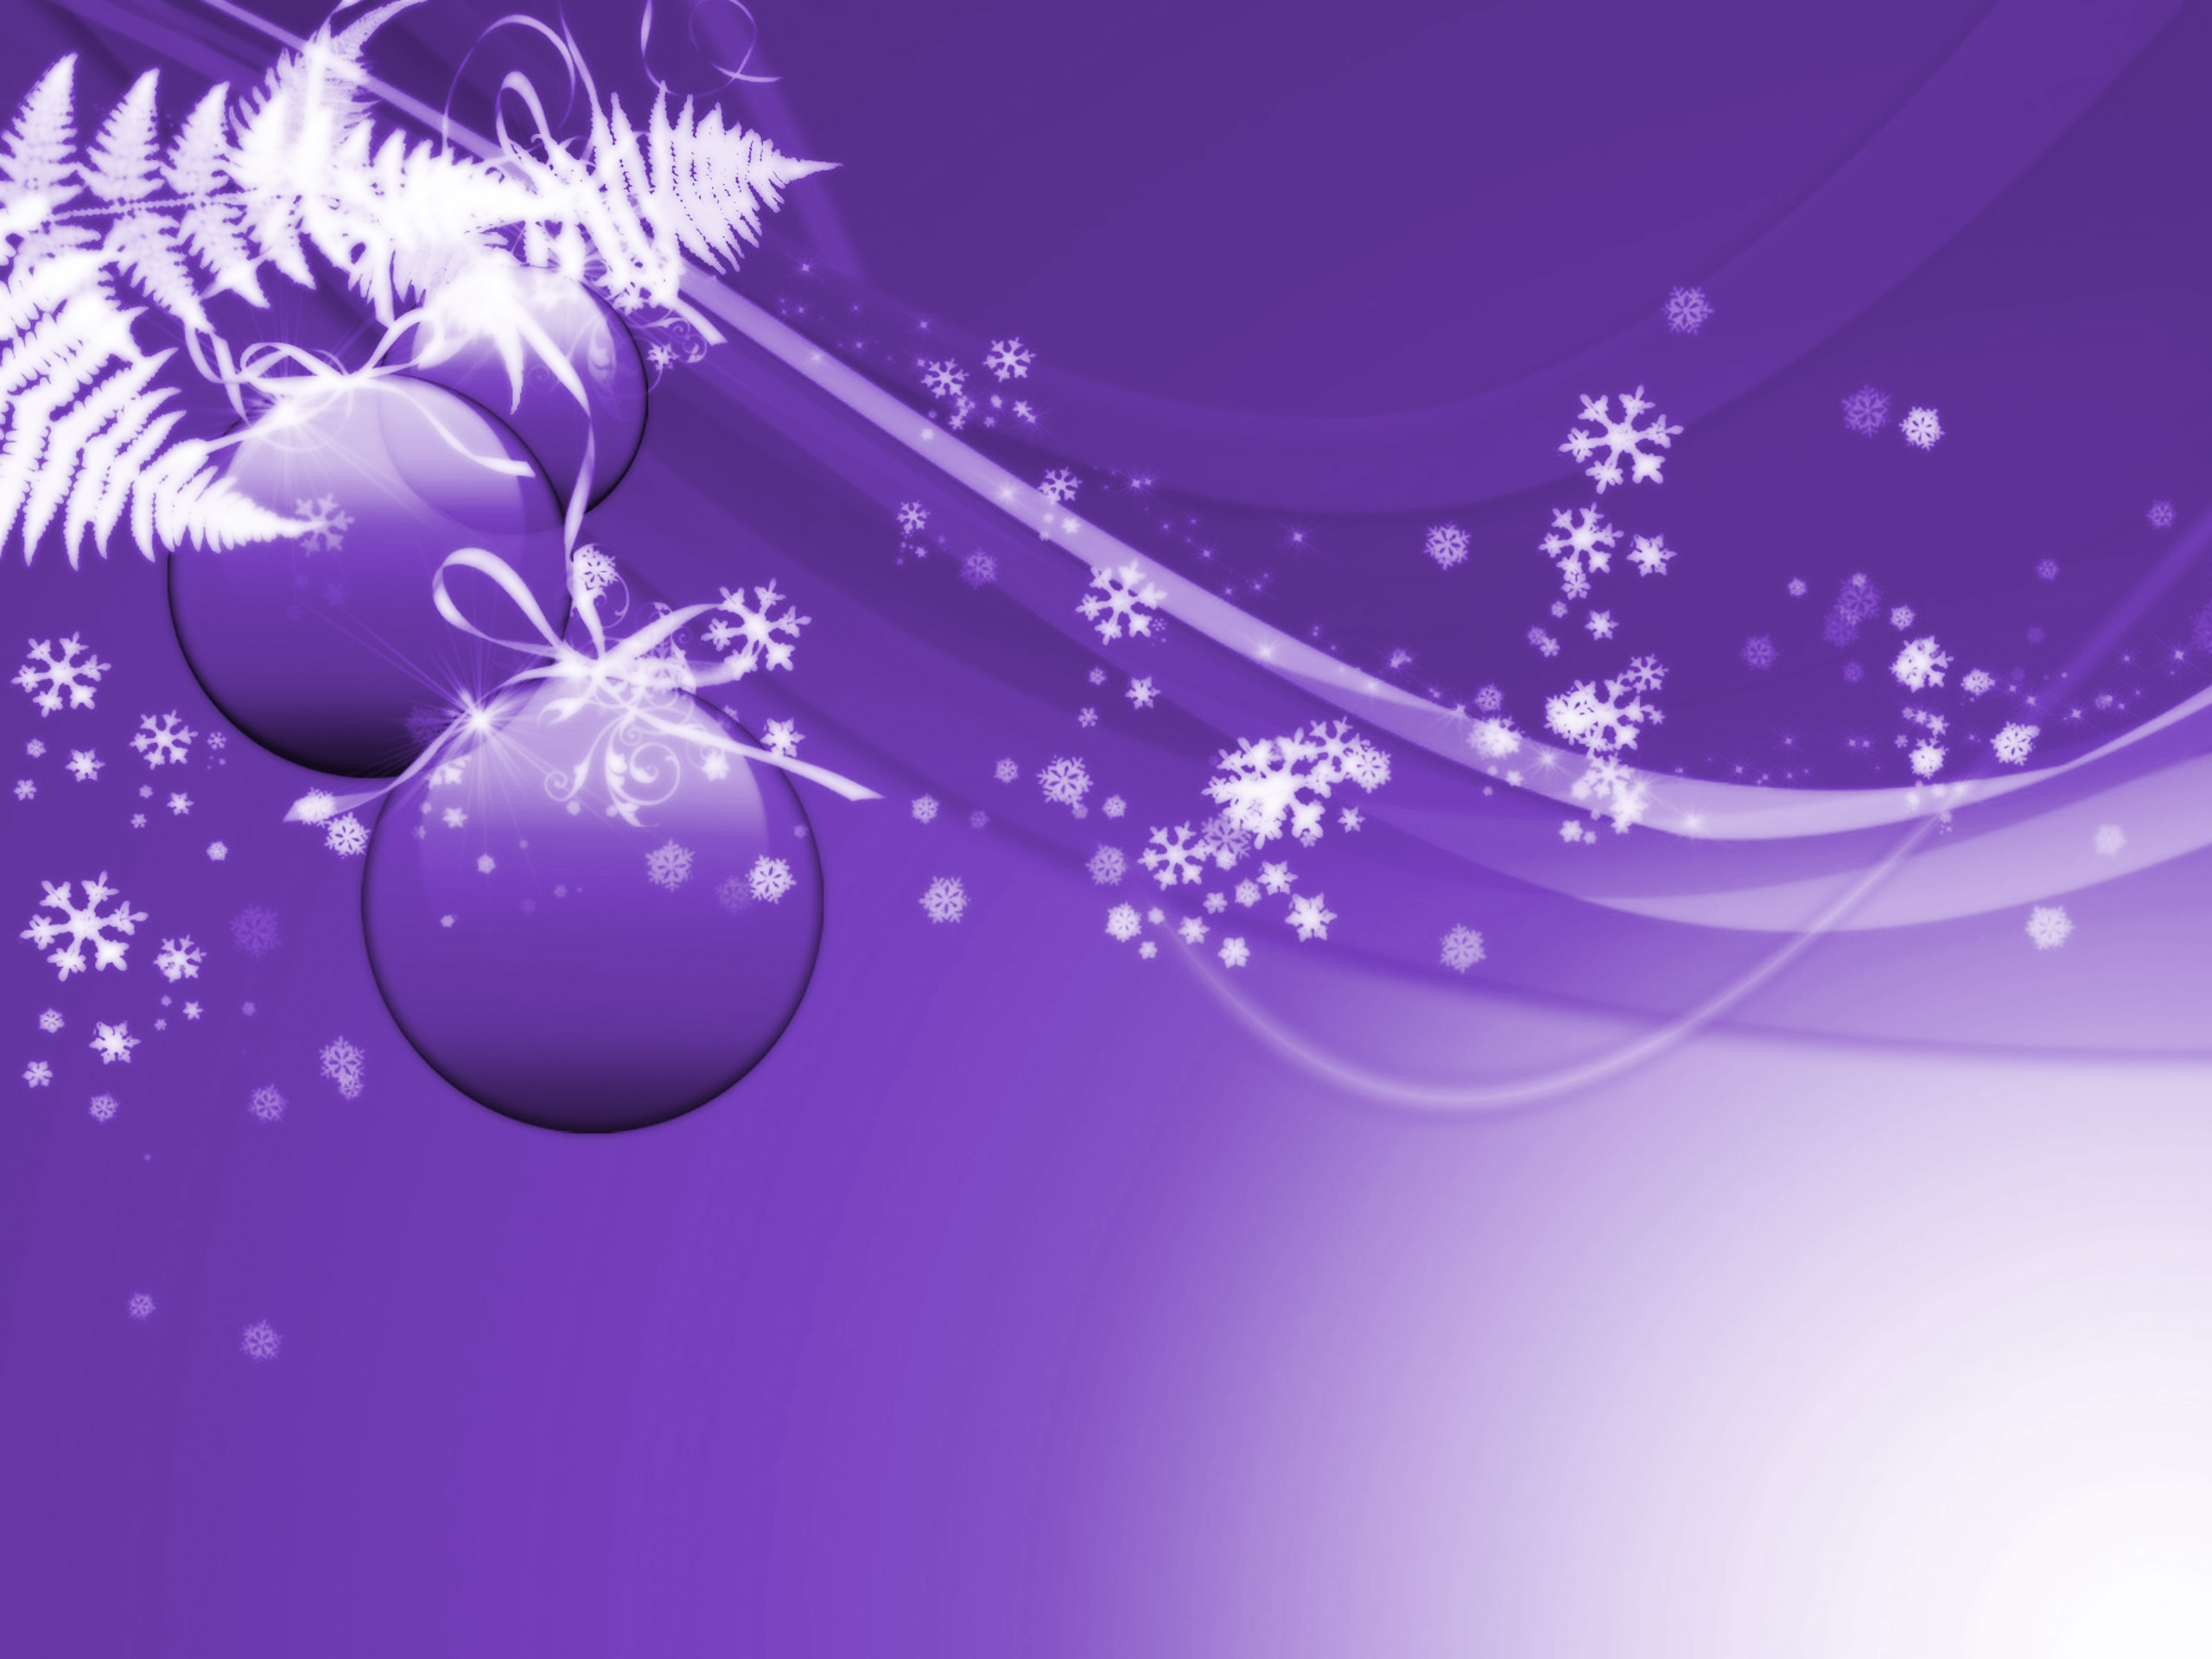 Gallery For Gt Purple Christmas Wallpaper